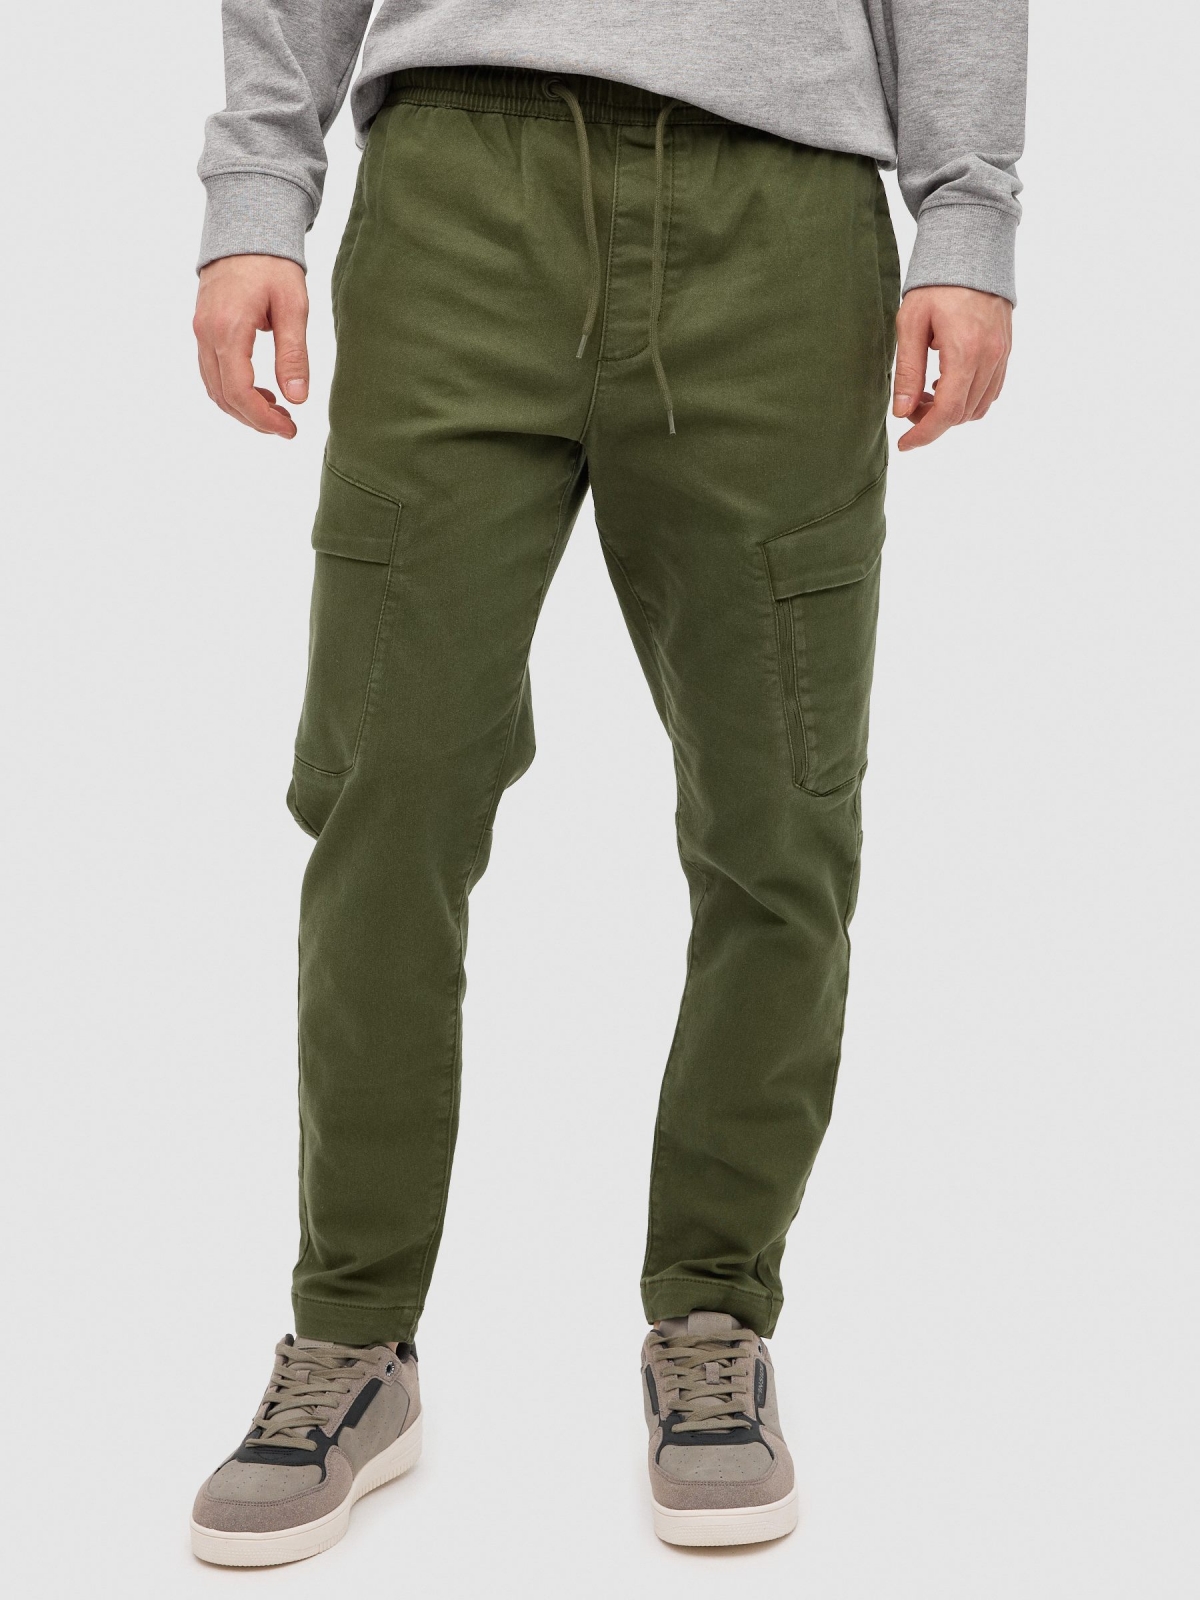 Men's cargo jogger pants green middle front view